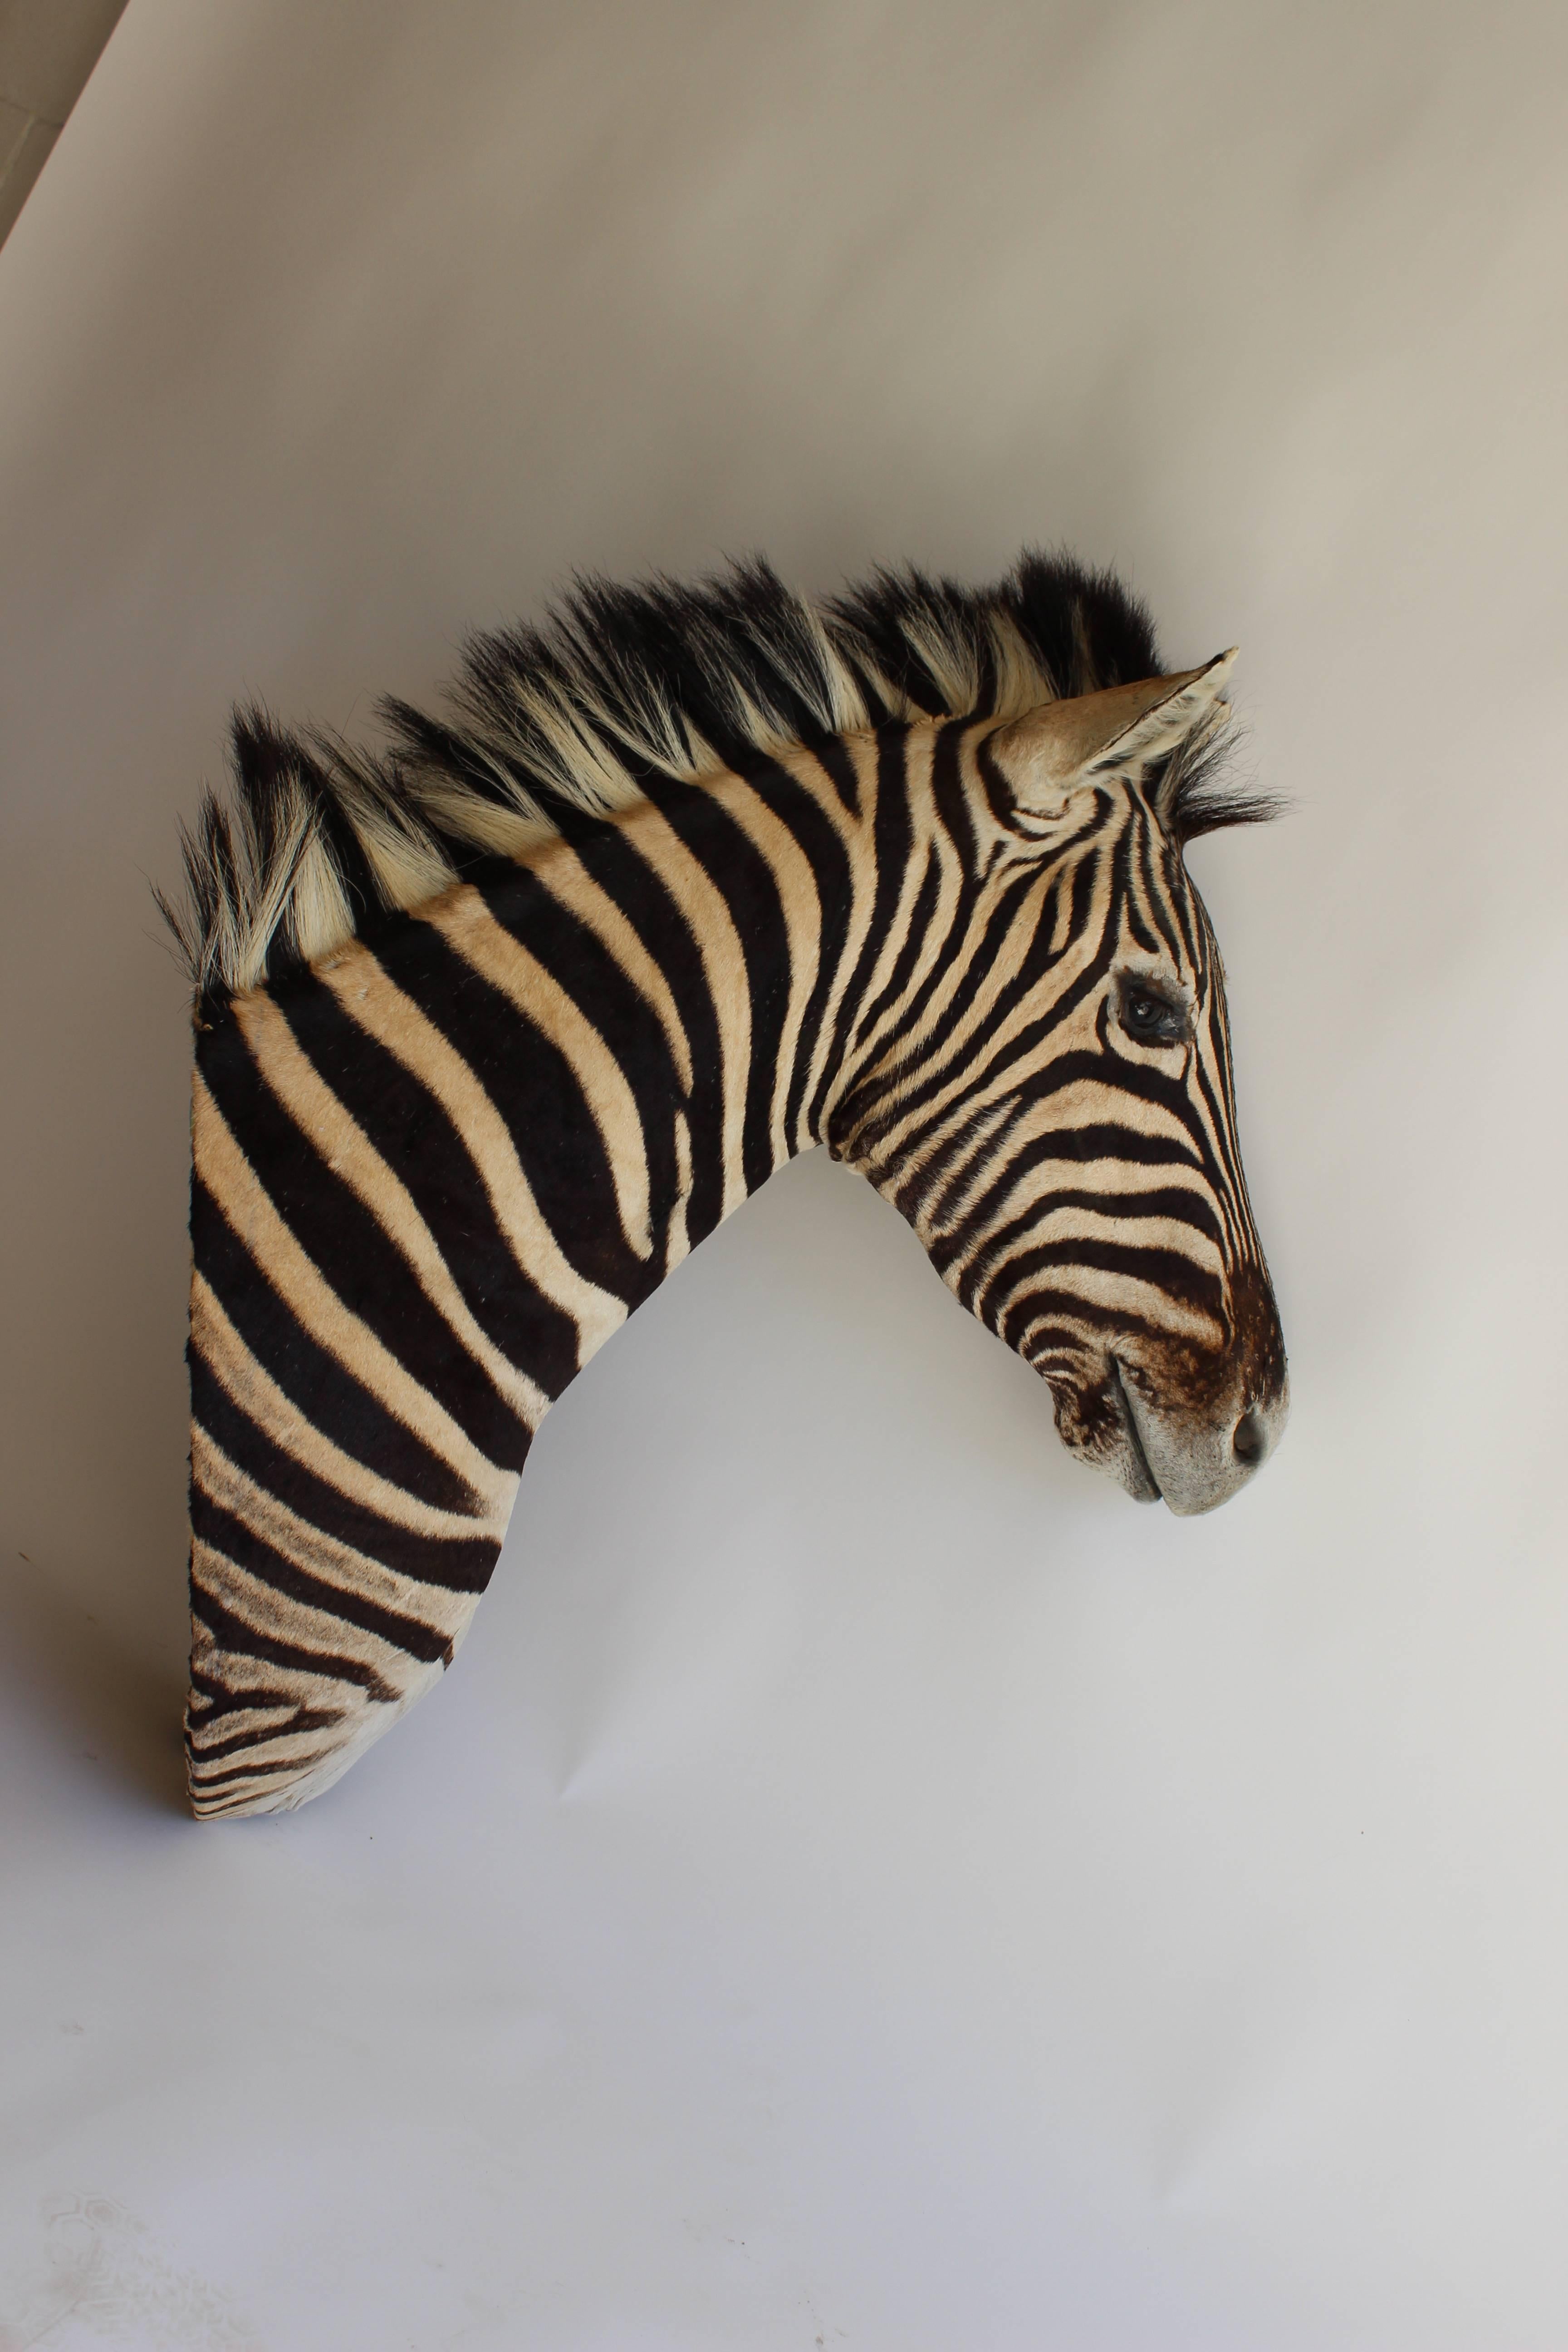 Zebra Head Taxidermy with a noble head and expression.....
 